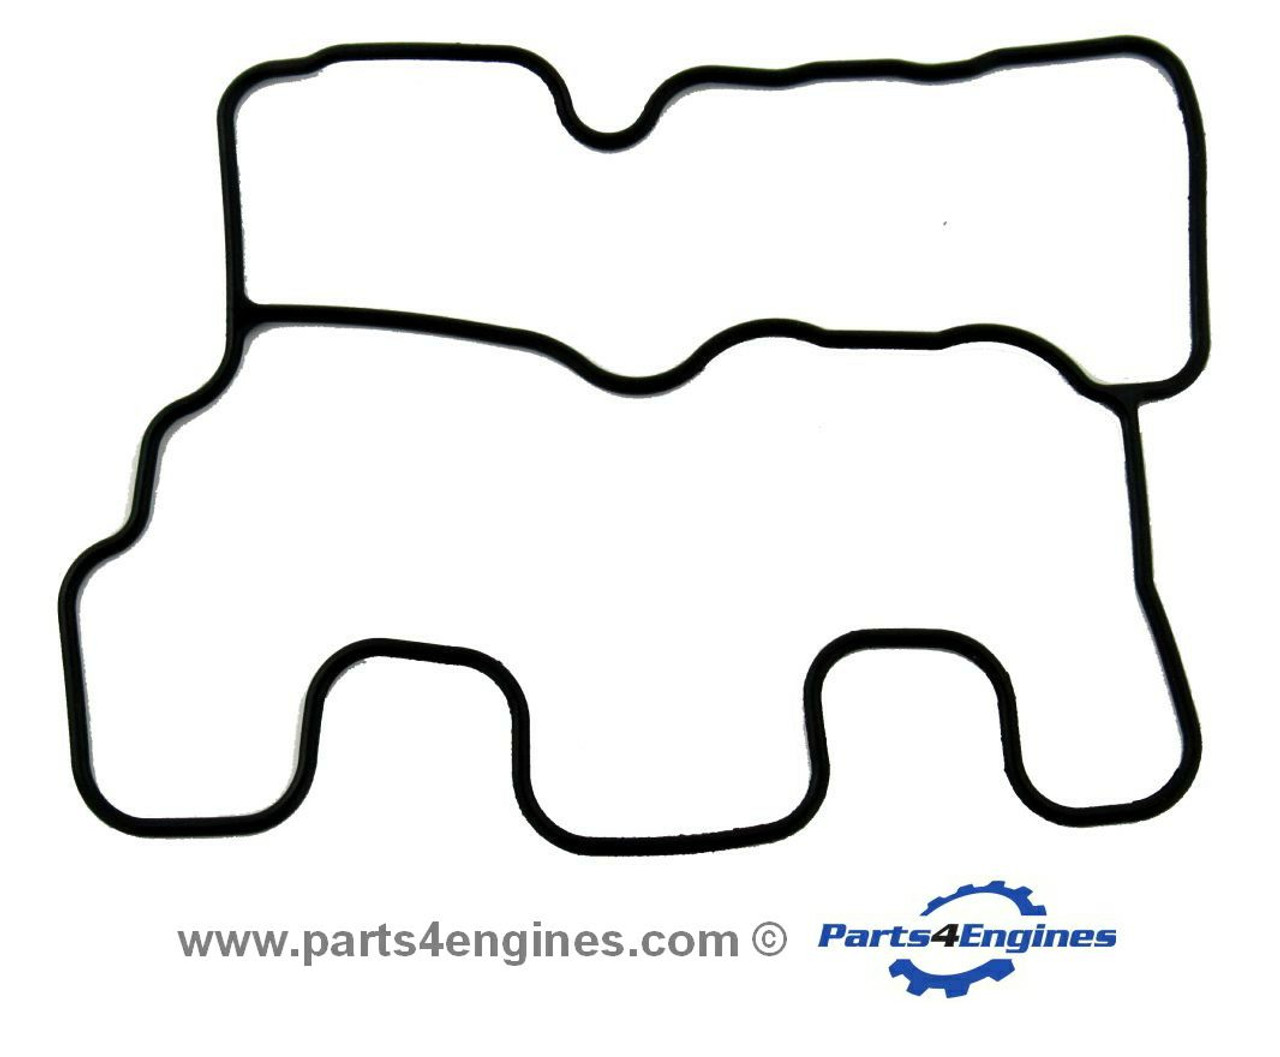 Perkins 402C-05 Cylinder head cover gasket, from parts4engins.com